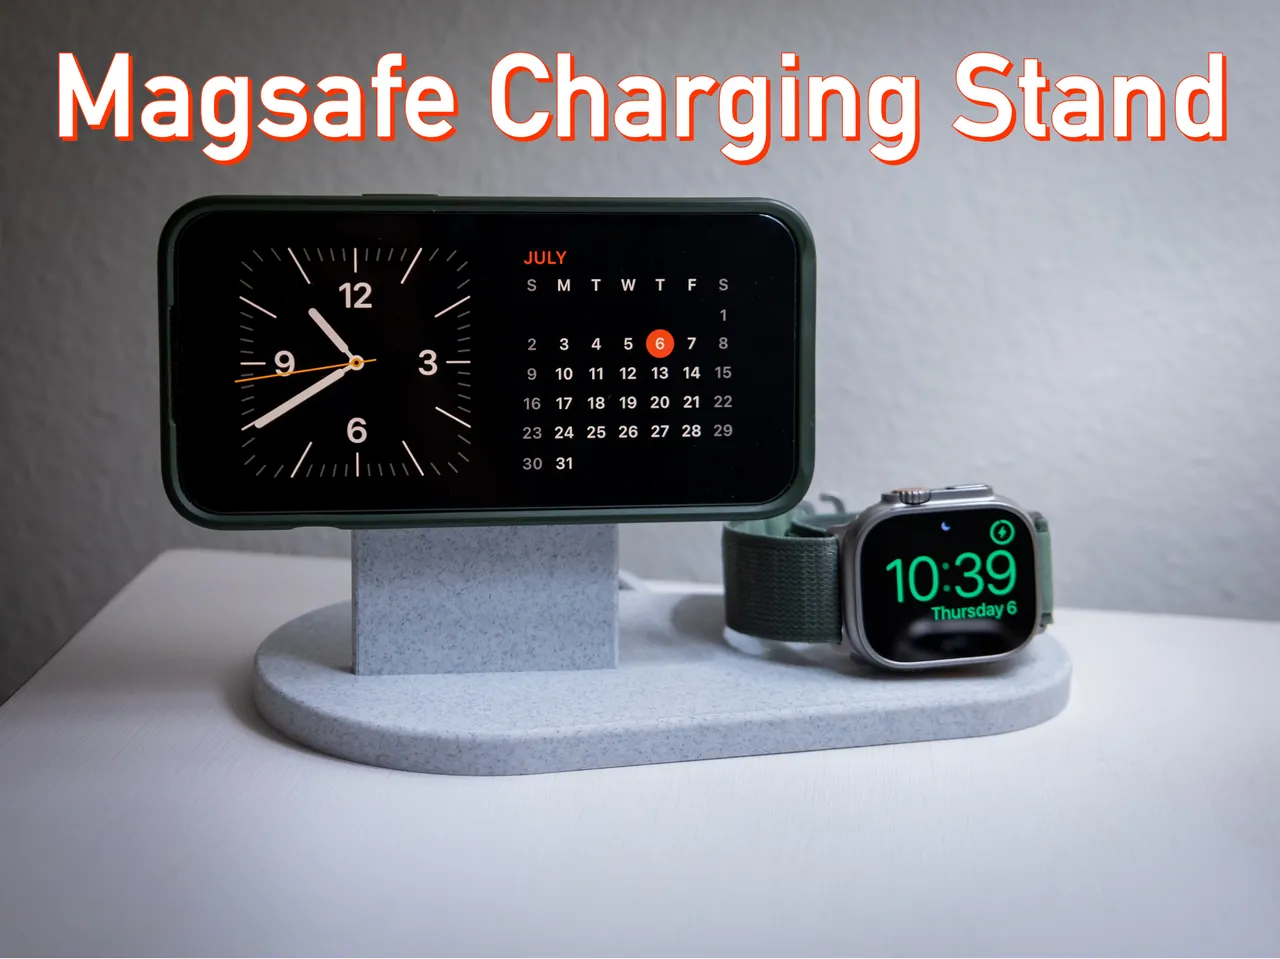 MagSafe Stand - iPhone Charging Stand for Apple Magsafe